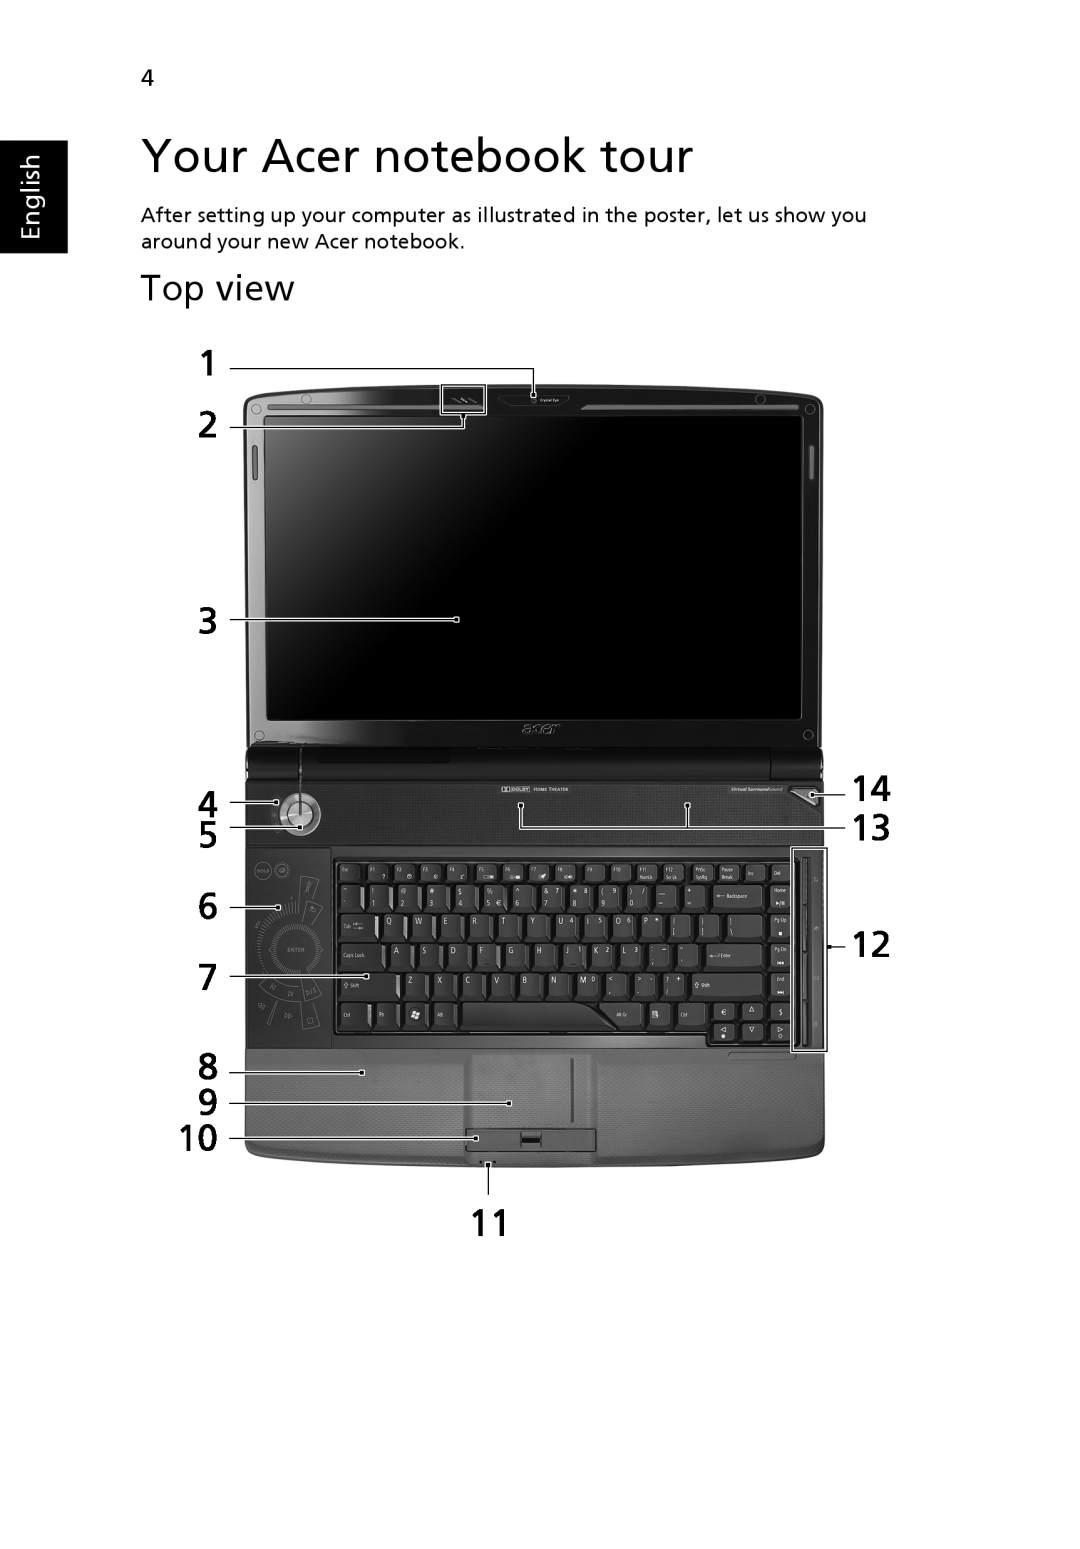 Acer 6935 Series manual Your Acer notebook tour, Top view, English 